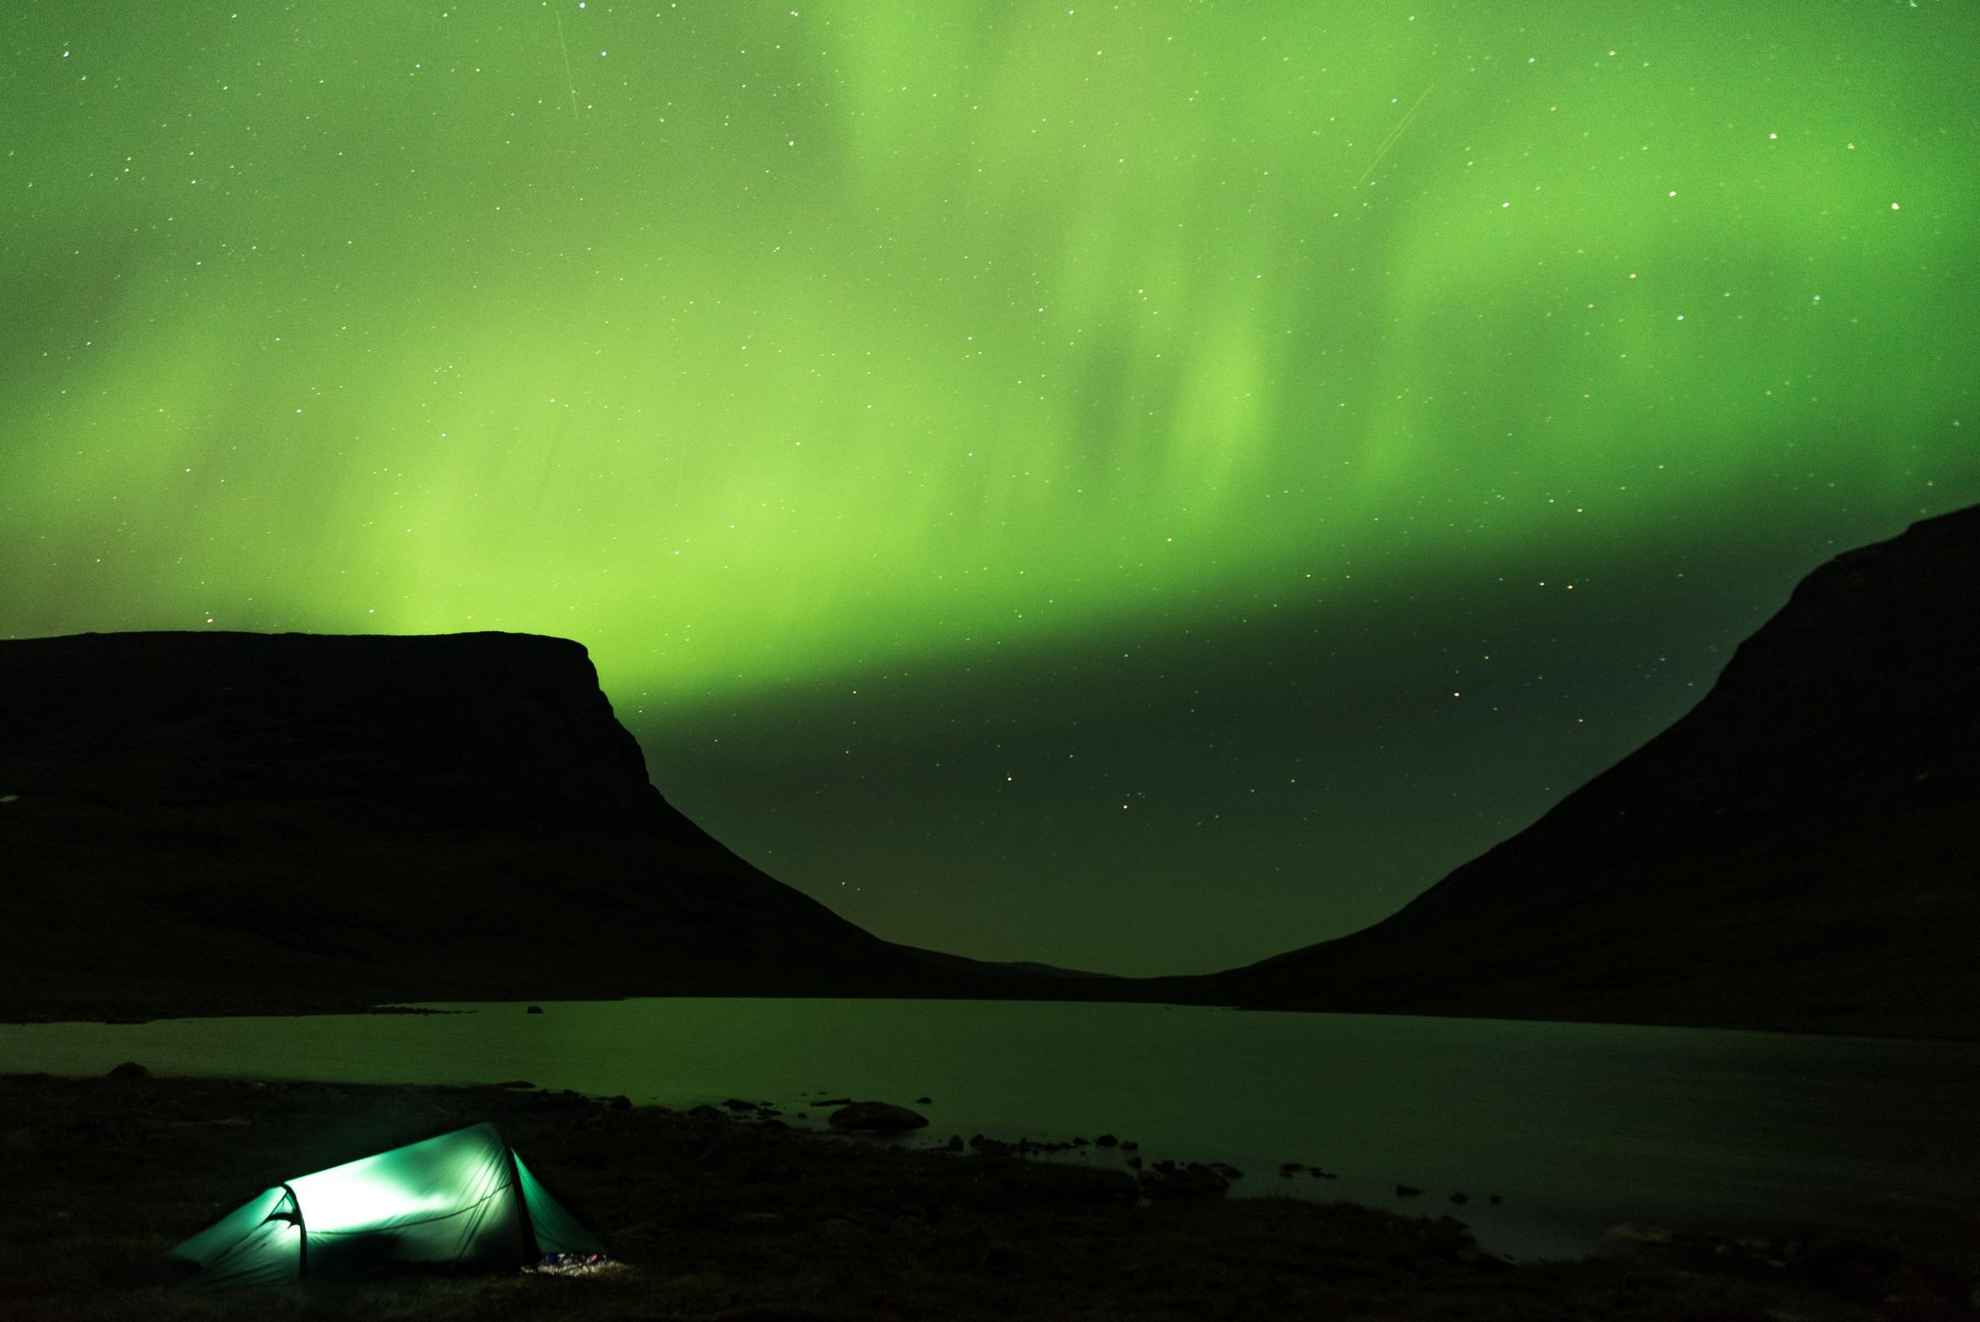 Northern lights are dancing above Lapporten mountains in Abisko. By Torne lake, a pitched tent is lit from inside.